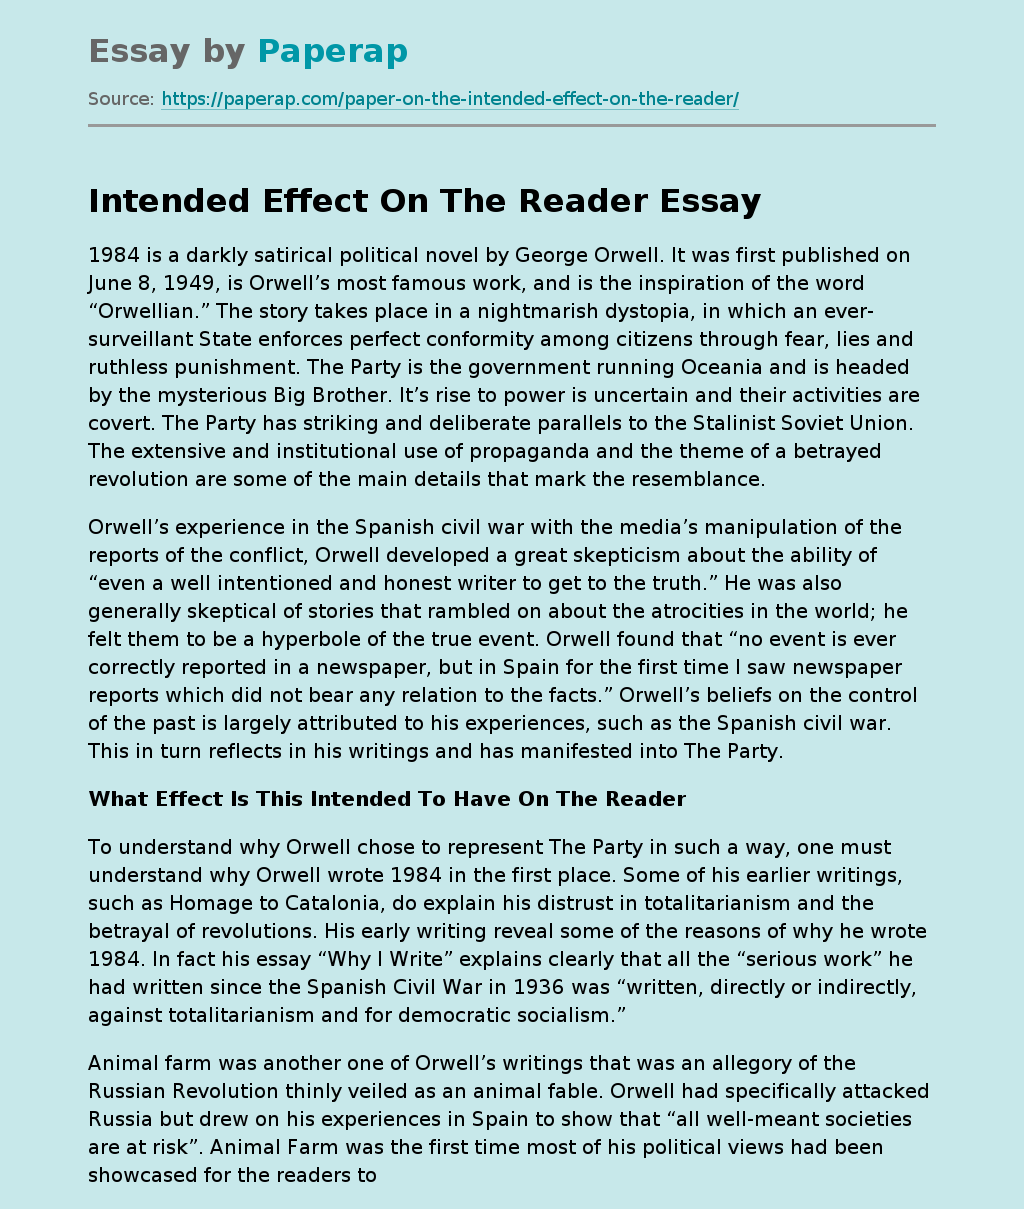 Intended Effect On The Reader